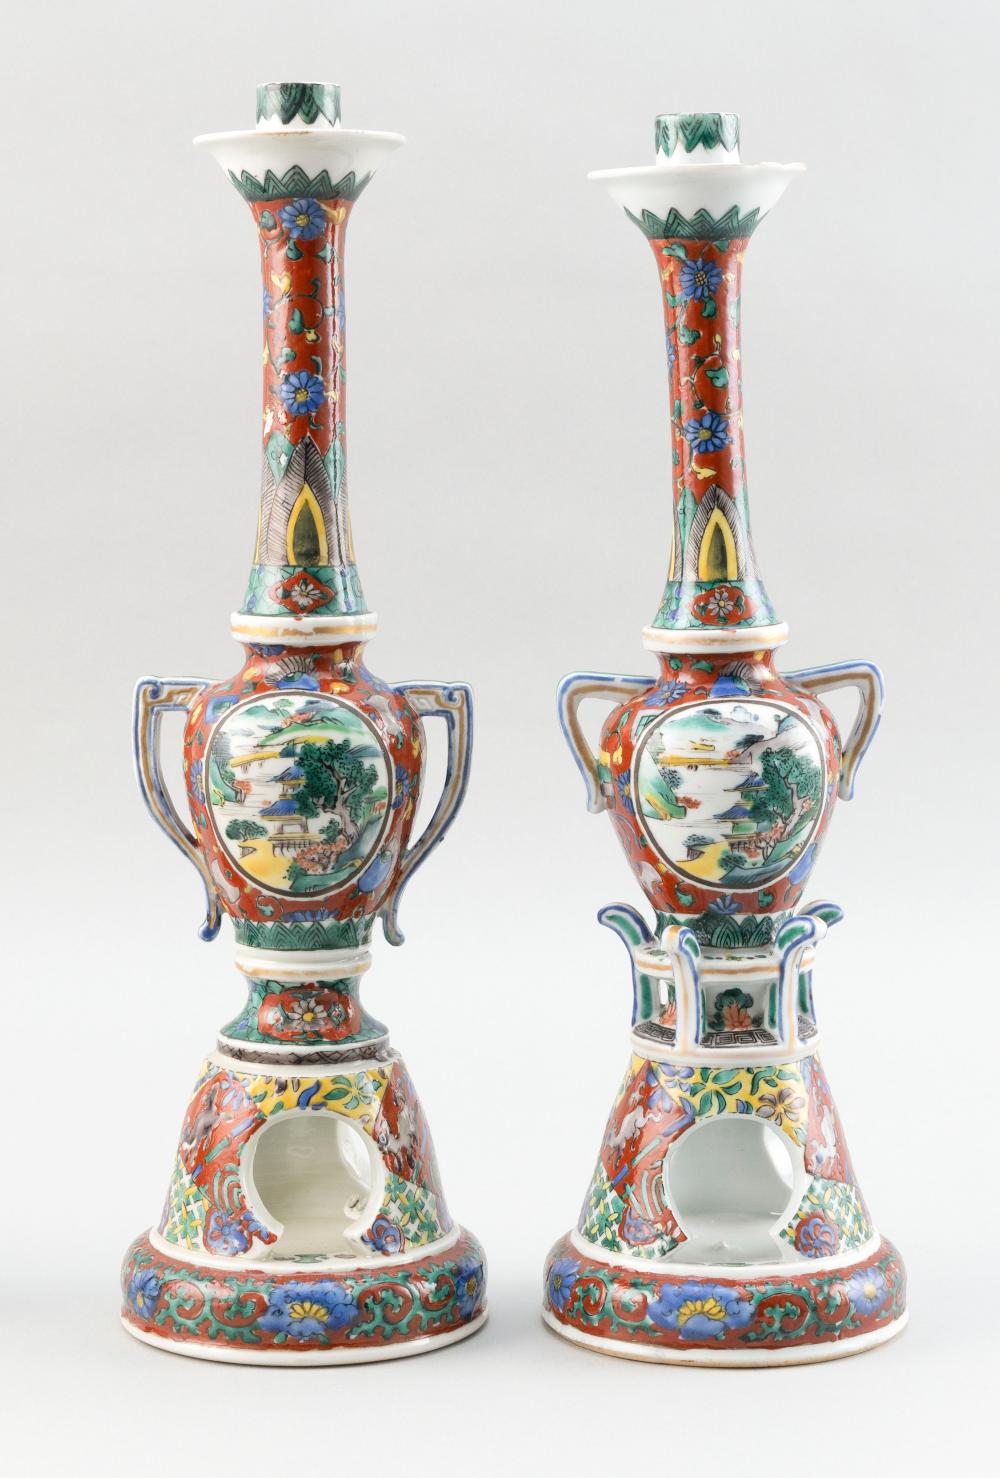 PAIR OF CHINESE POLYCHROME PORCELAIN